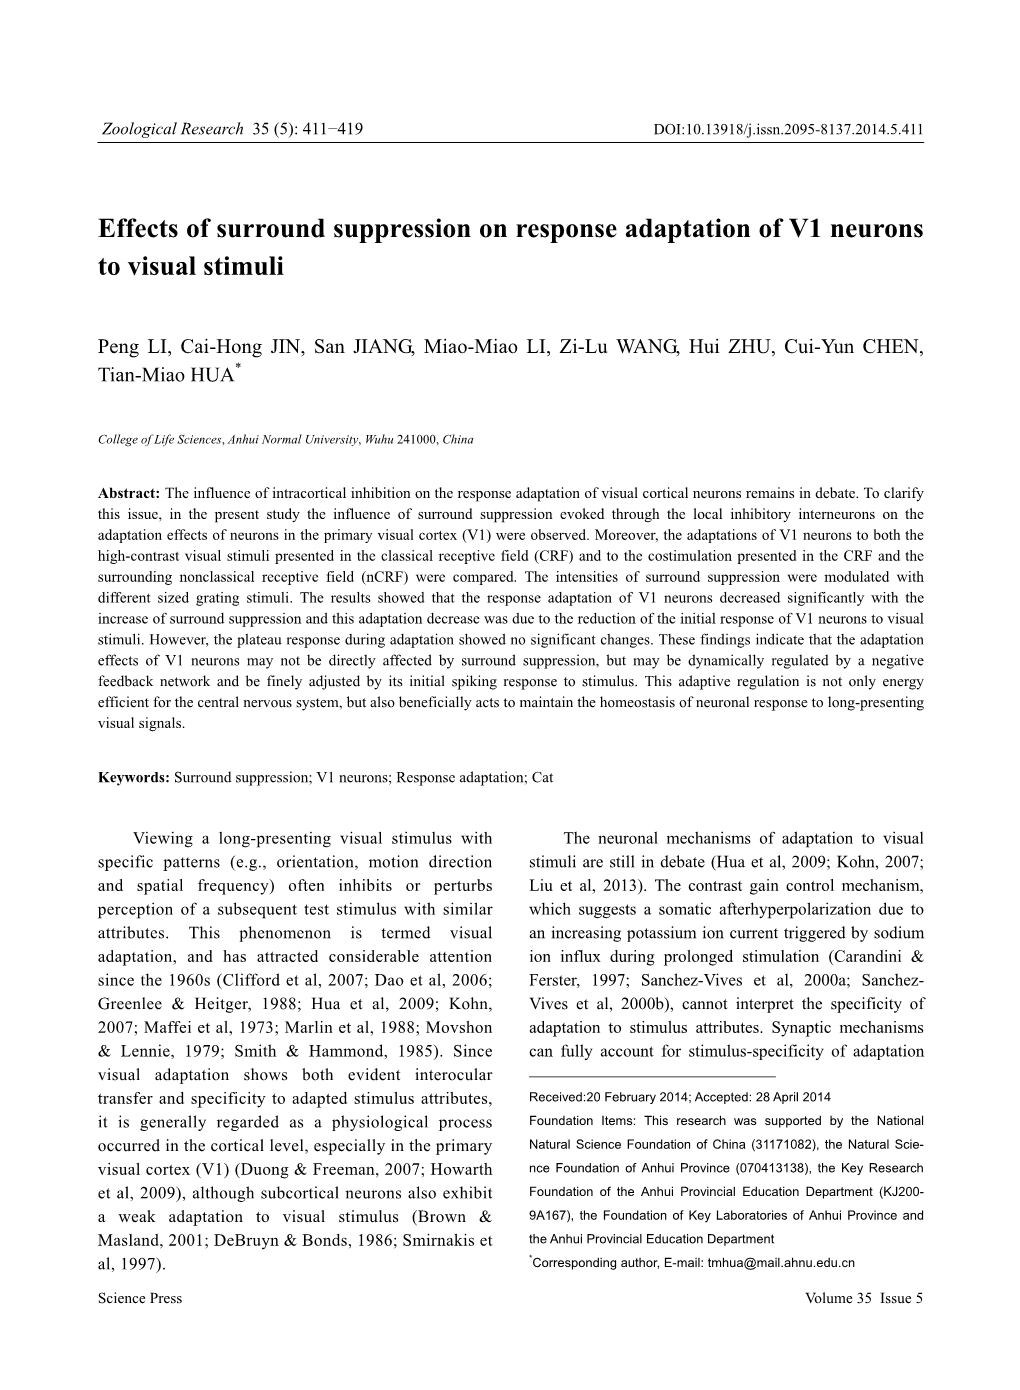 Effects of Surround Suppression on Response Adaptation of V1 Neurons to Visual Stimuli